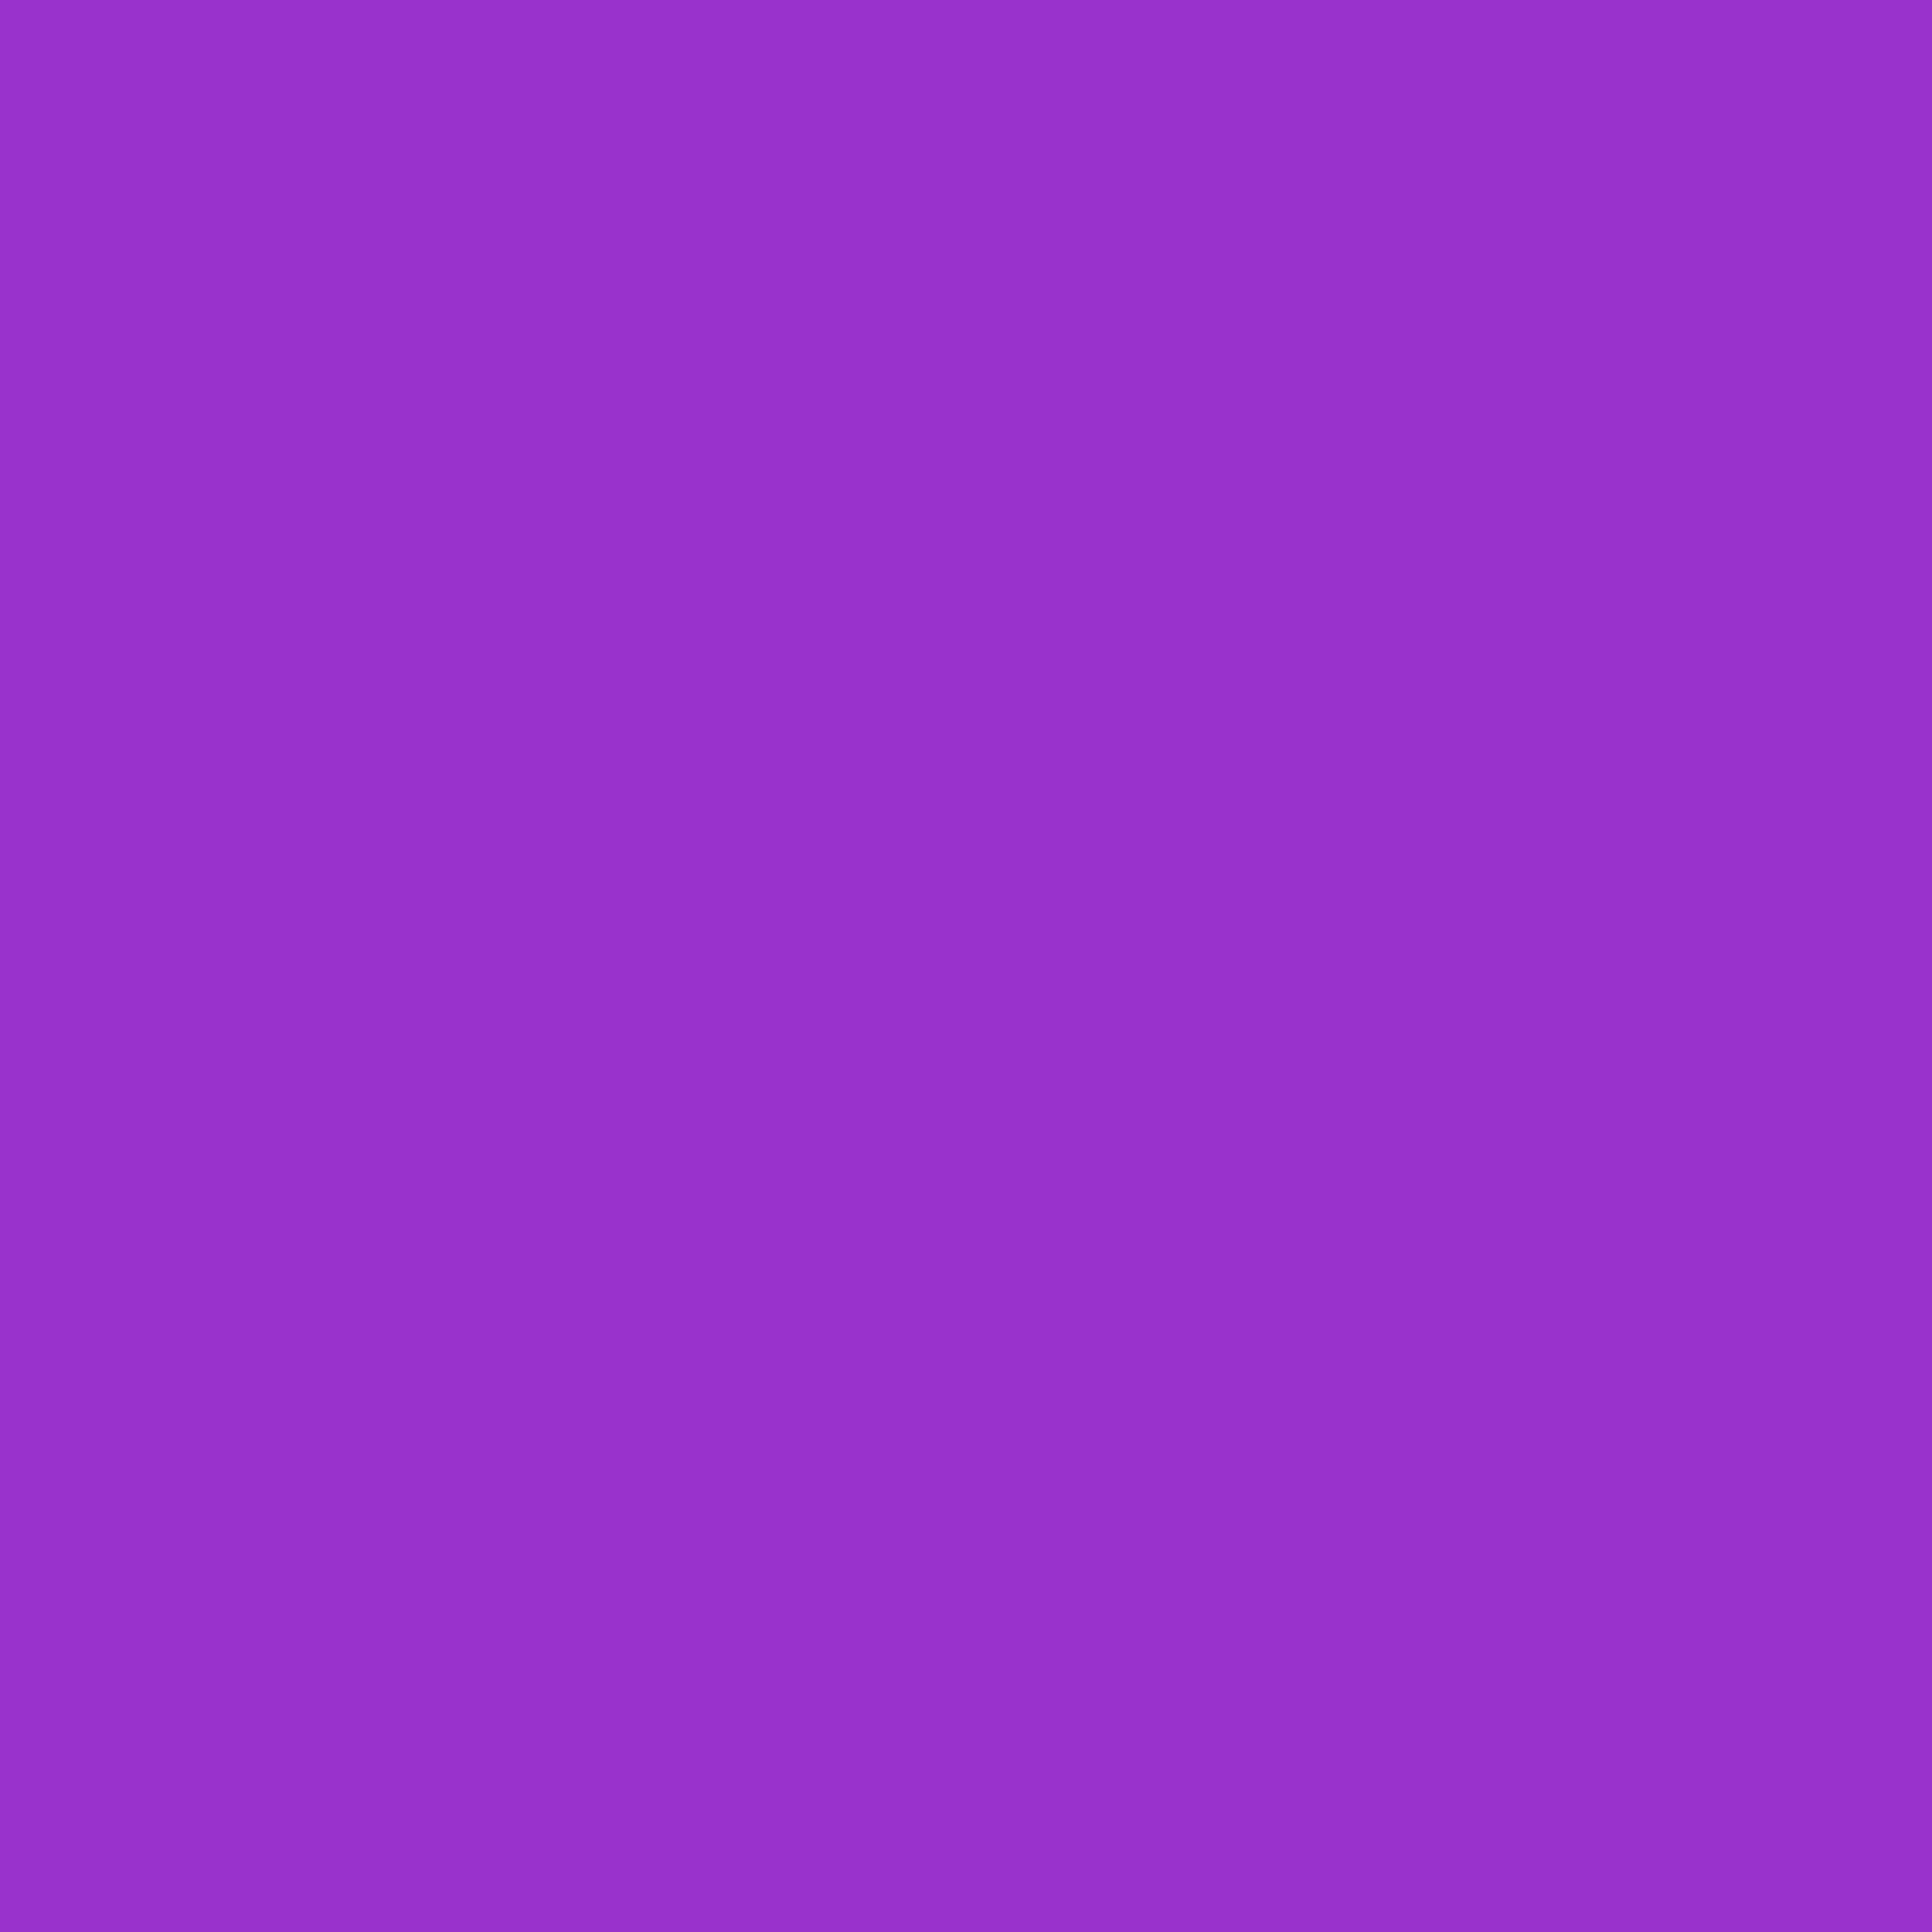 2732x2732 Dark Orchid Solid Color Background